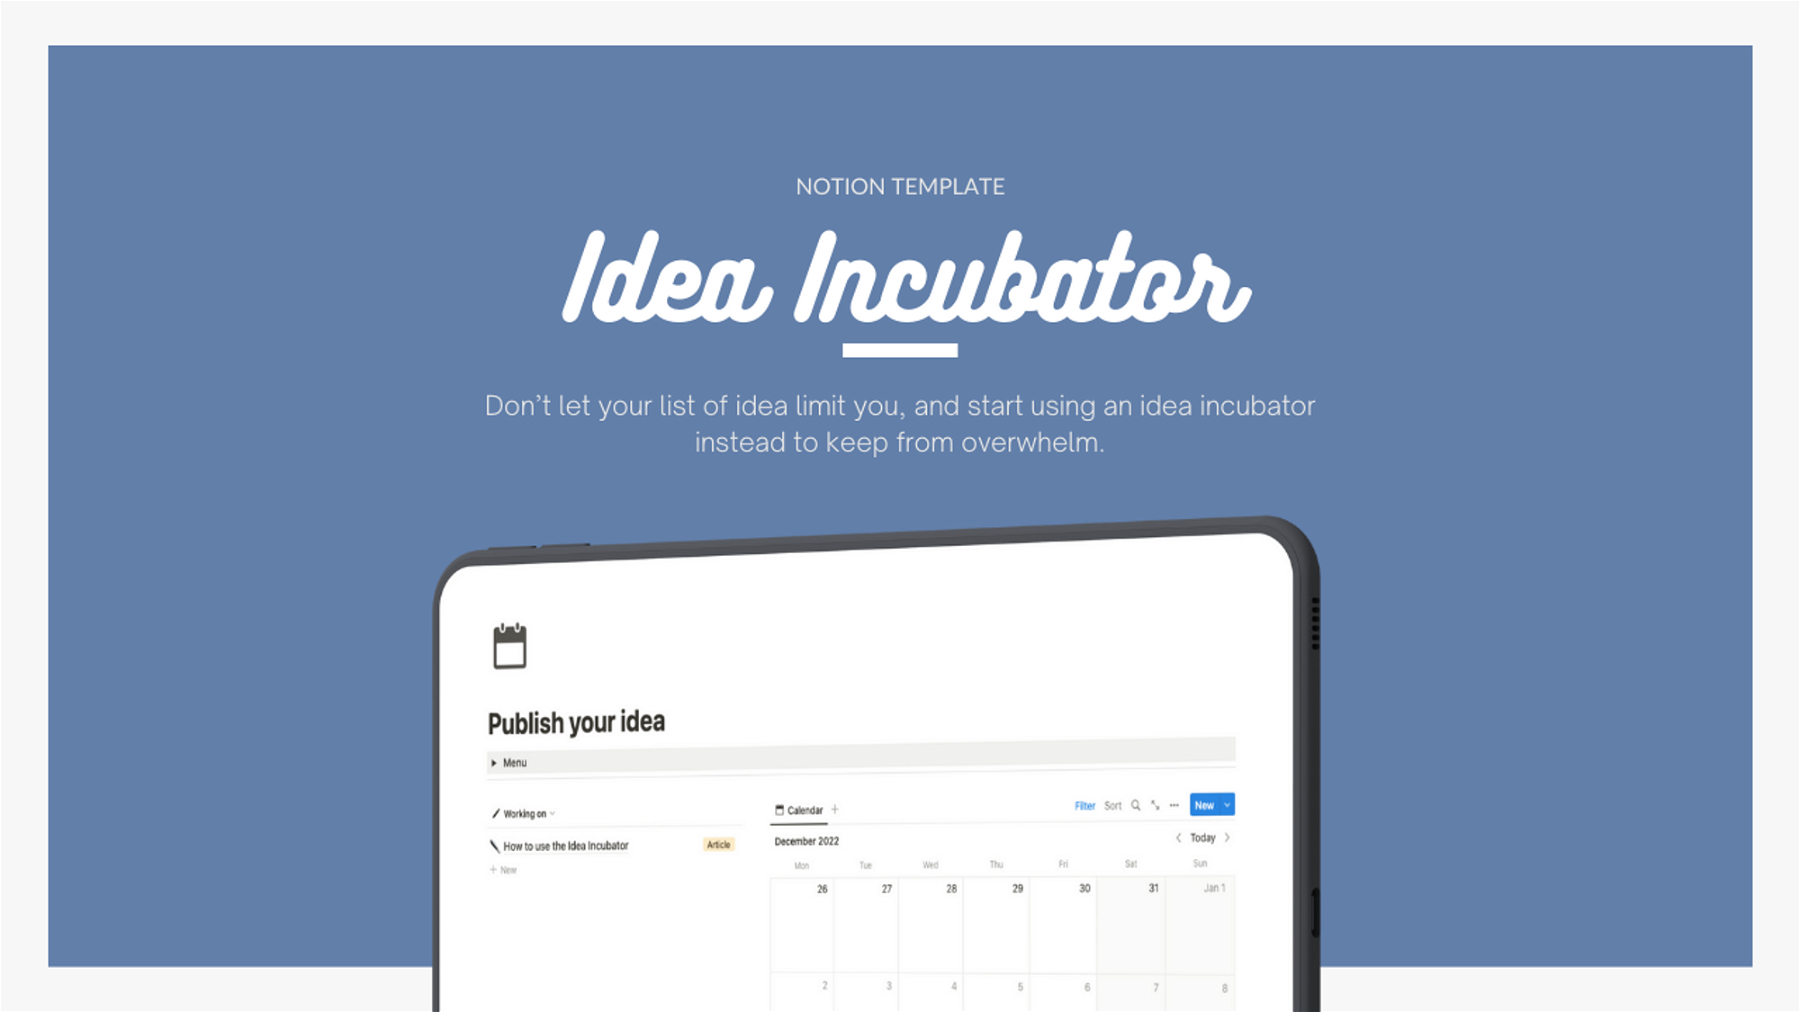 IDEA INCUBATOR - A Notion Template To Take Control Of Your Creative Process